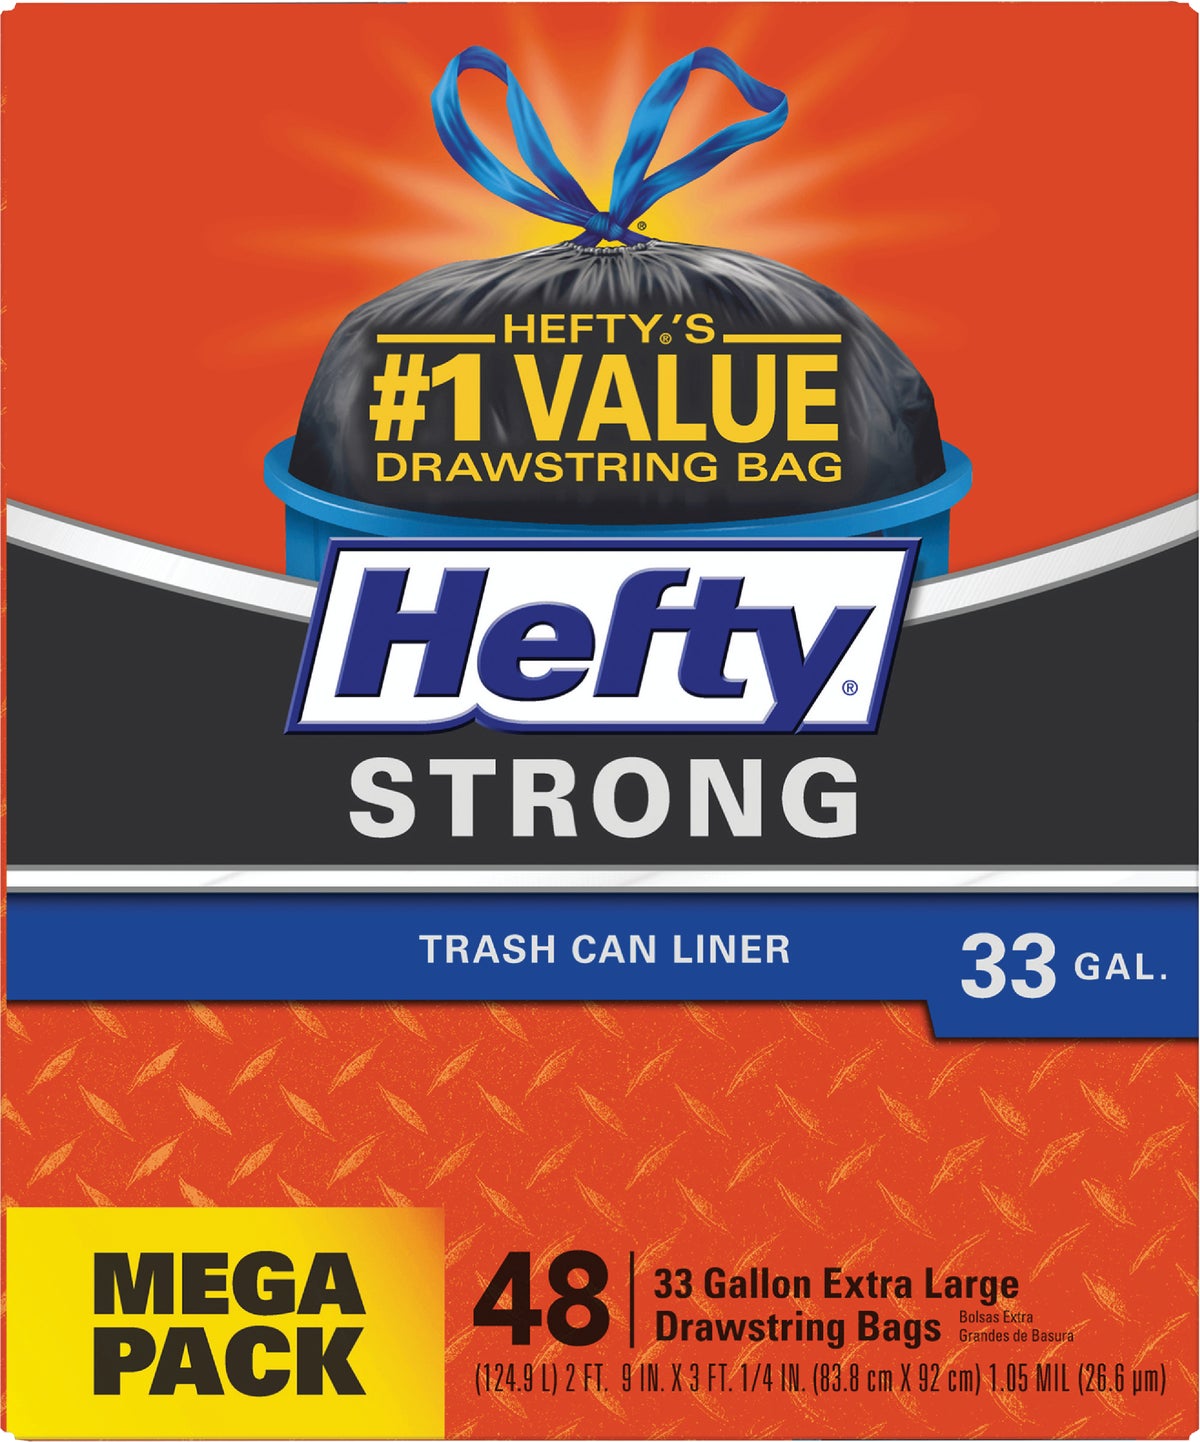 Hefty Strong Large Trash Bags - 33 Gallon, 48 Count 48